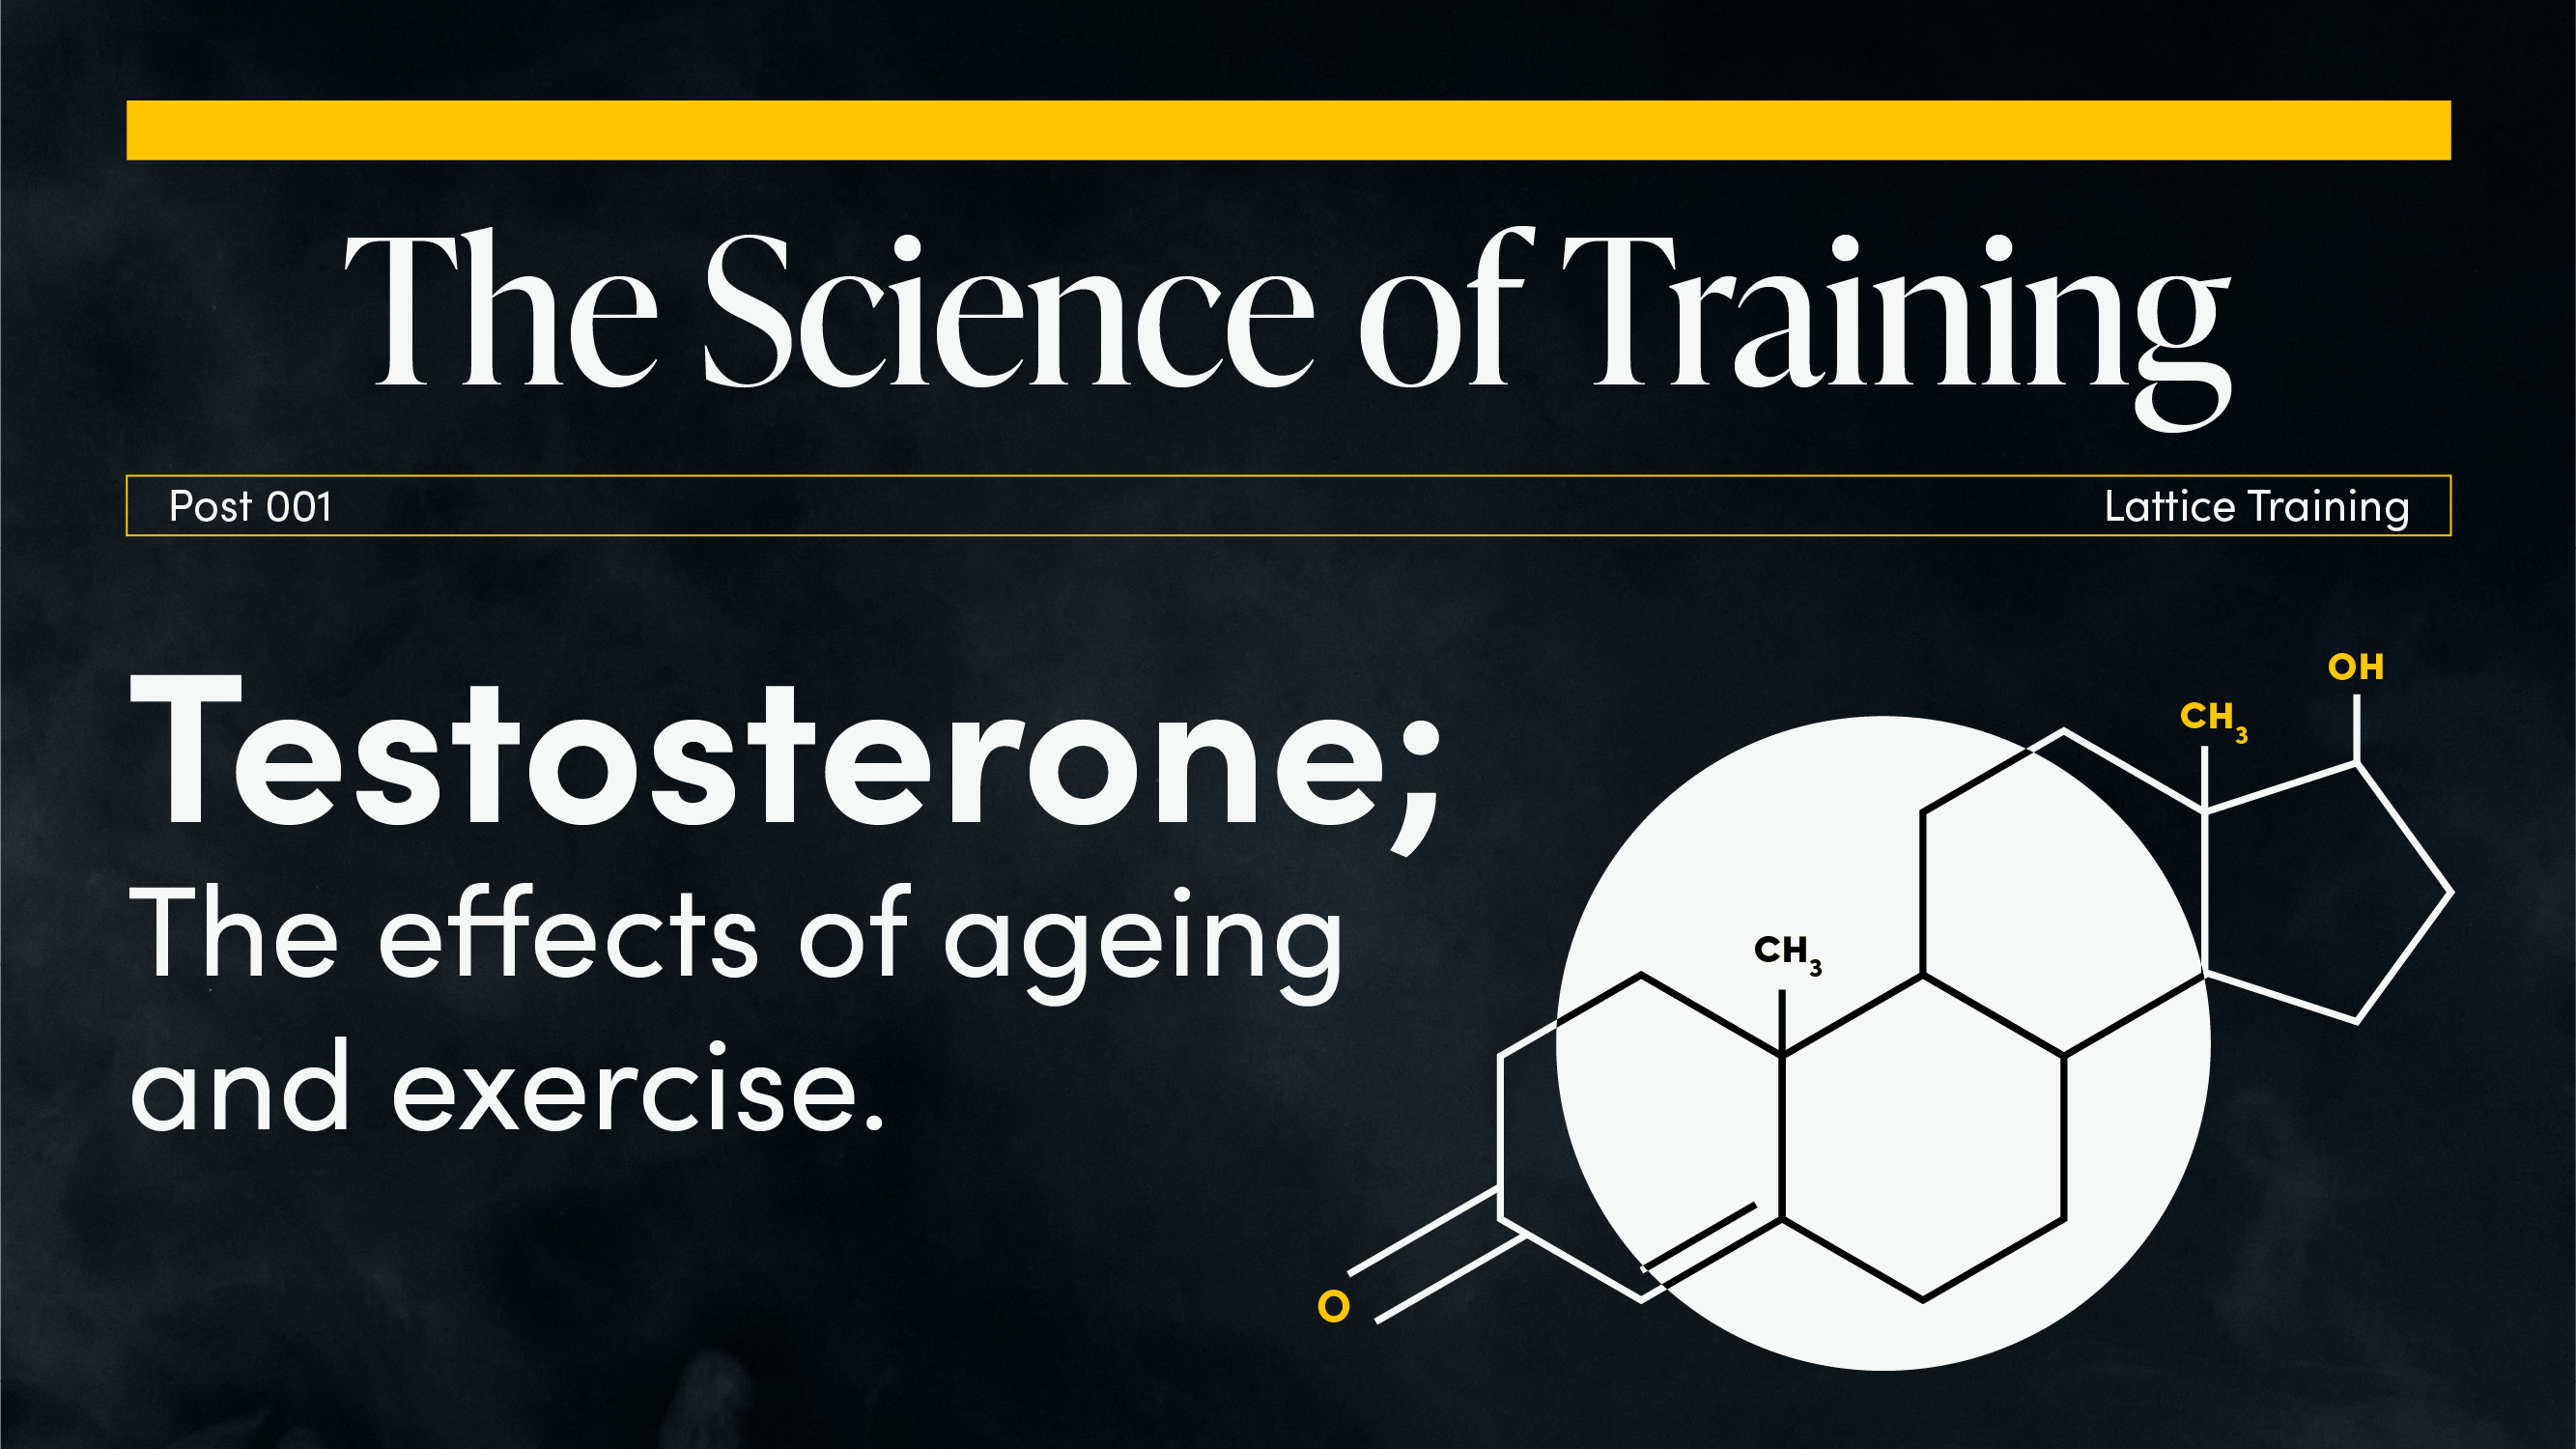 The Science of Training: Testosterone